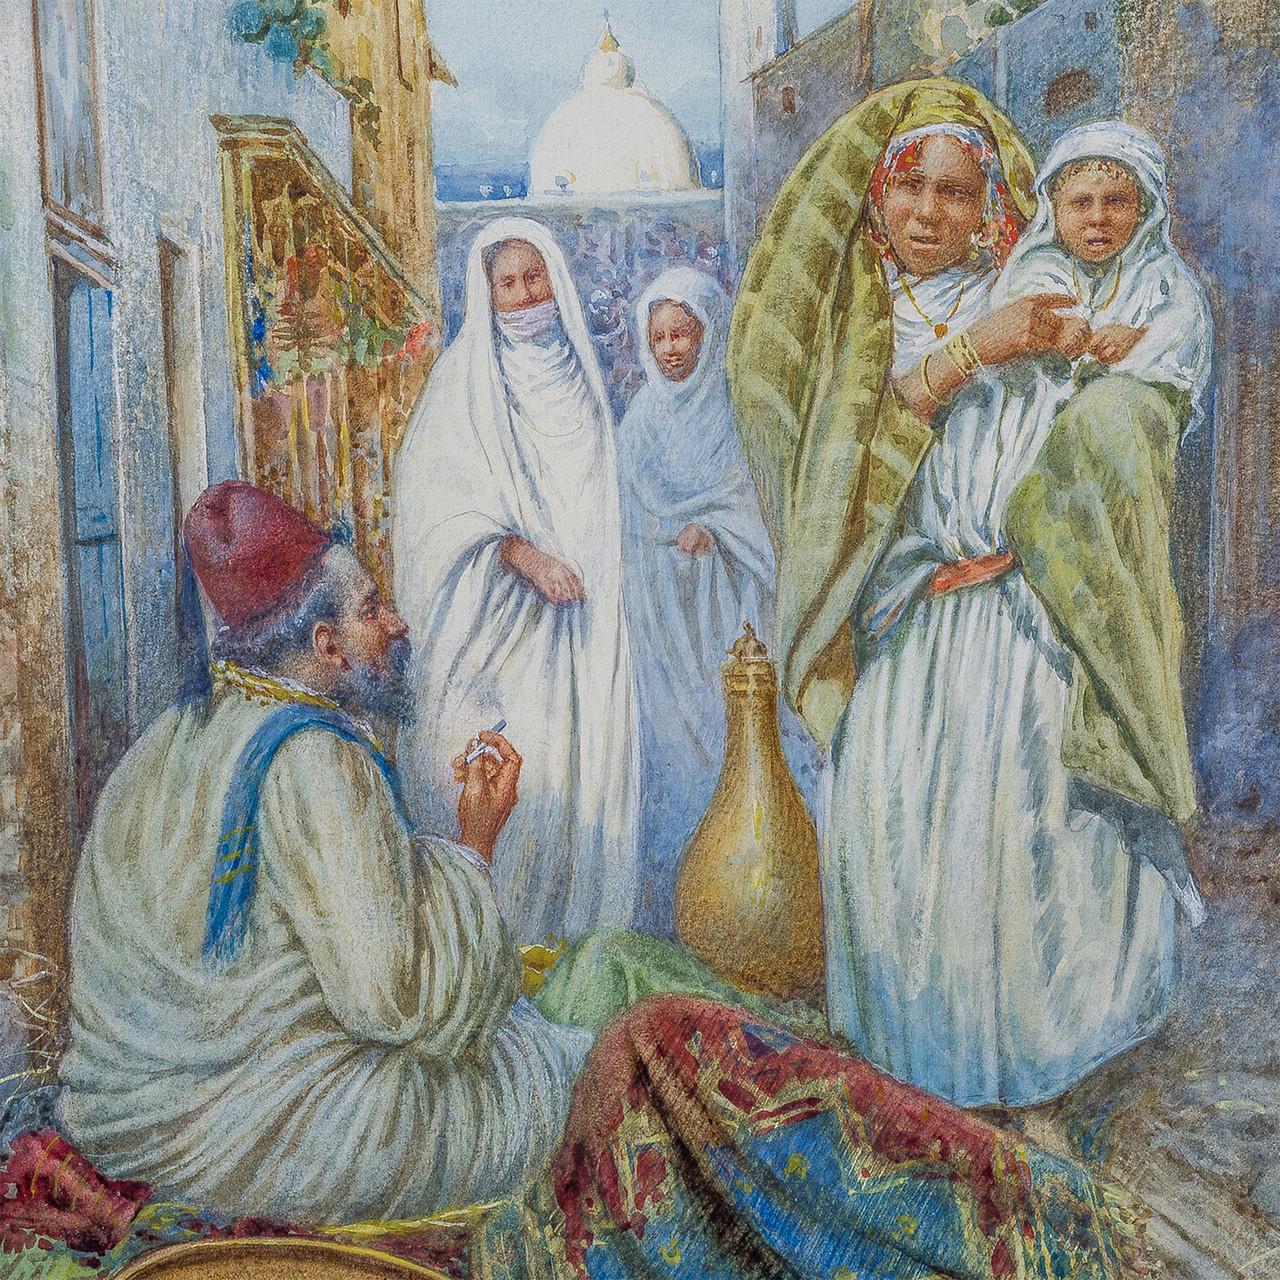 The Carpet Seller depicts a man in a domed Fez hat as he is approached by three women and a child. Middle eastern architecture floods the scene. The way the paint is applied creates texture and movement unlike most watercolor pieces . 

Artist: